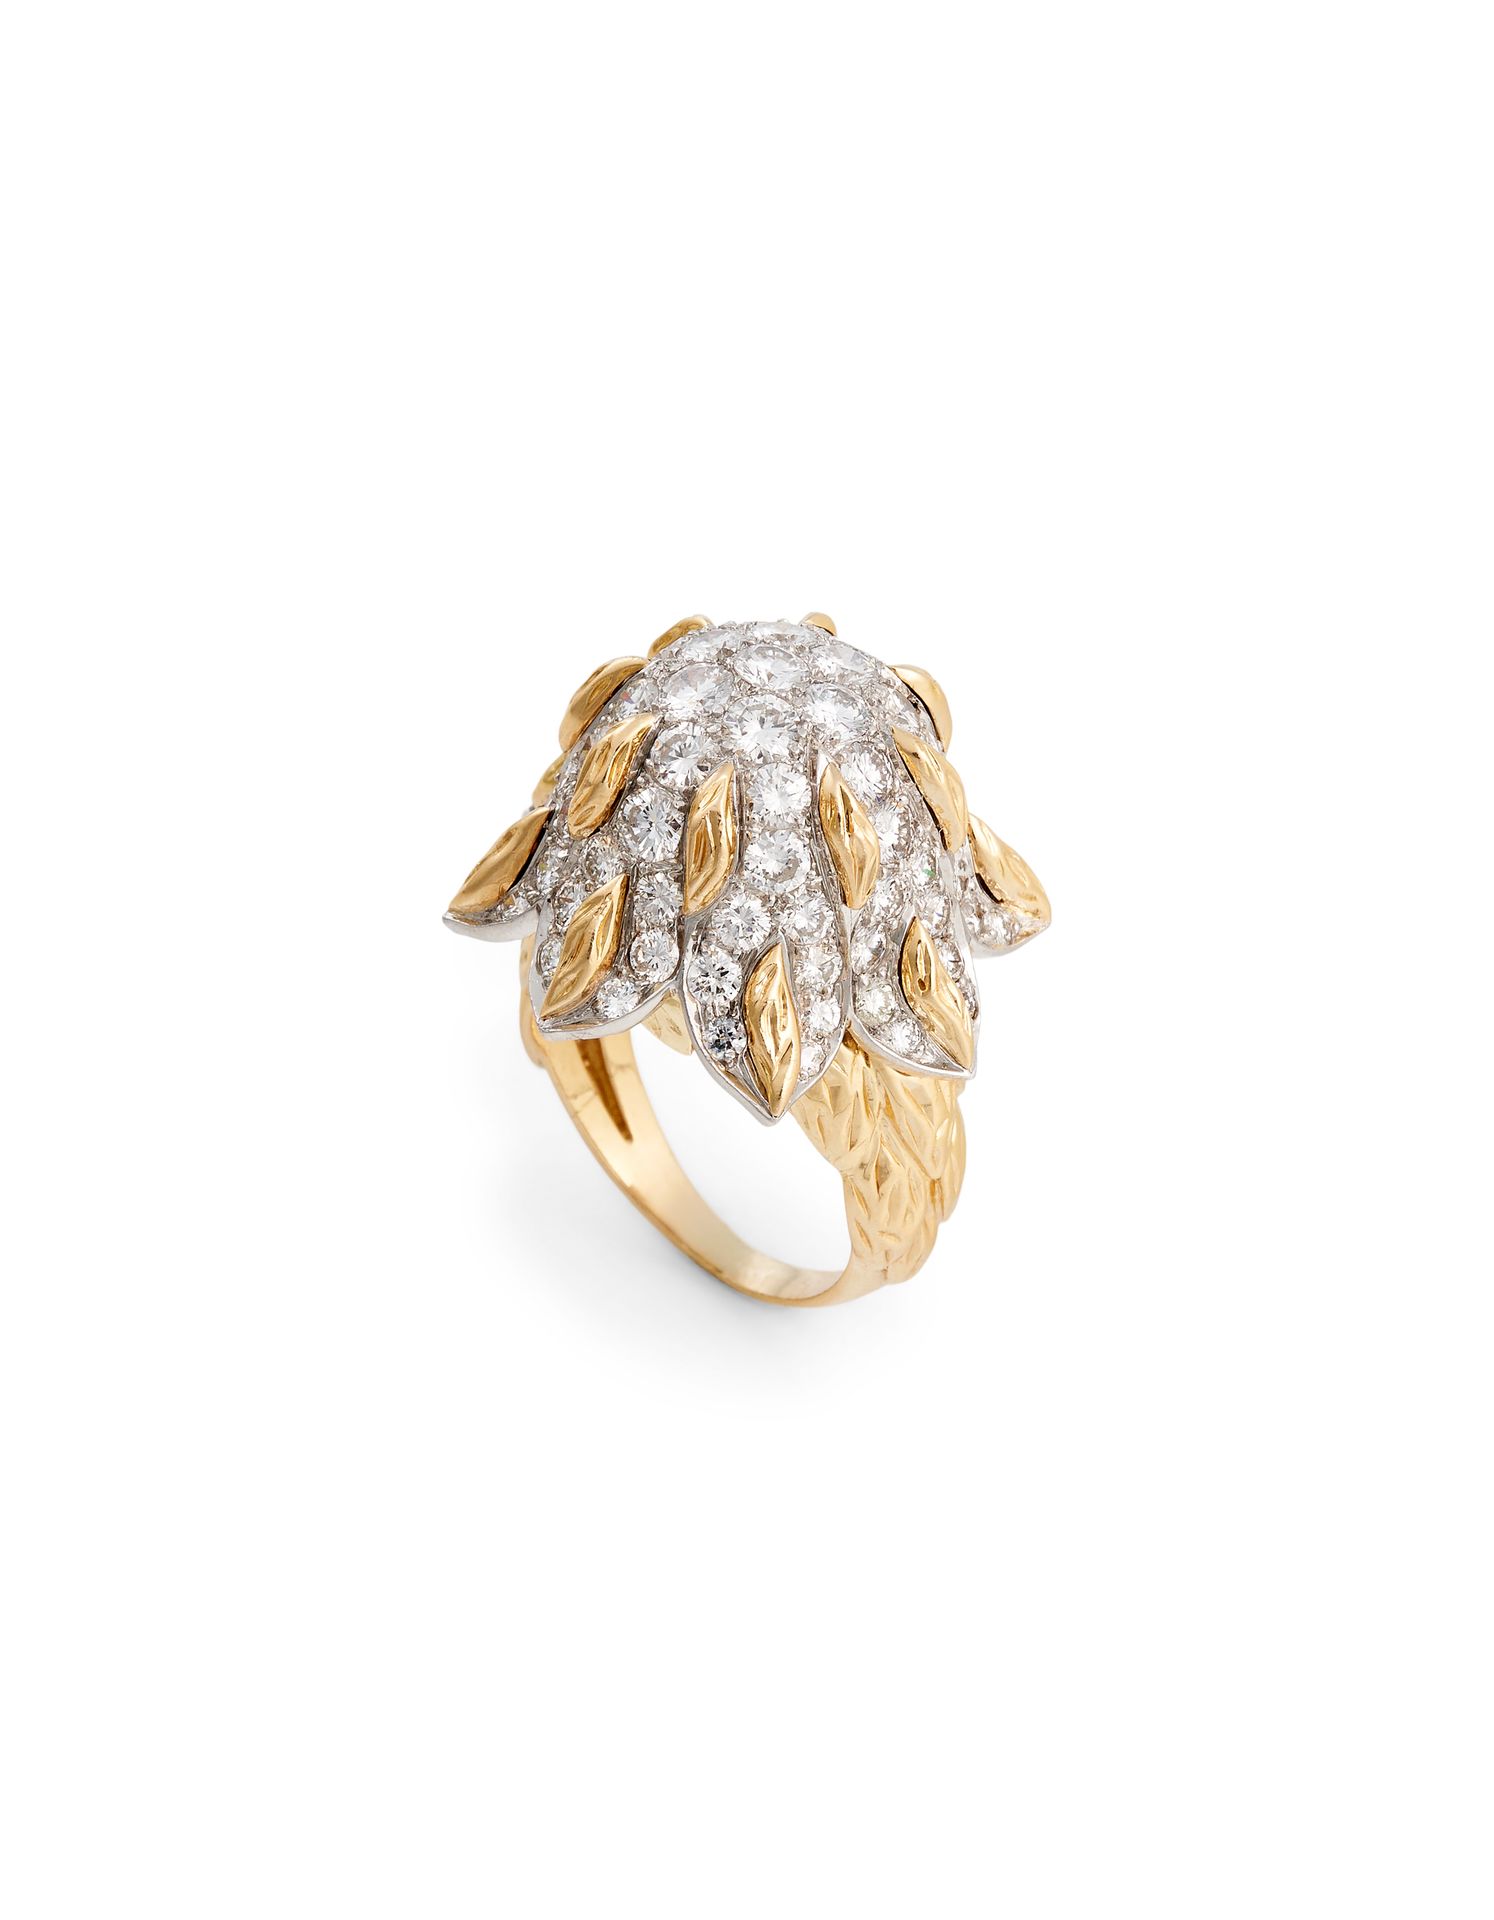 Null COCKTAIL RING In 18K yellow and white gold, set with 87 brilliant cut diamo&hellip;